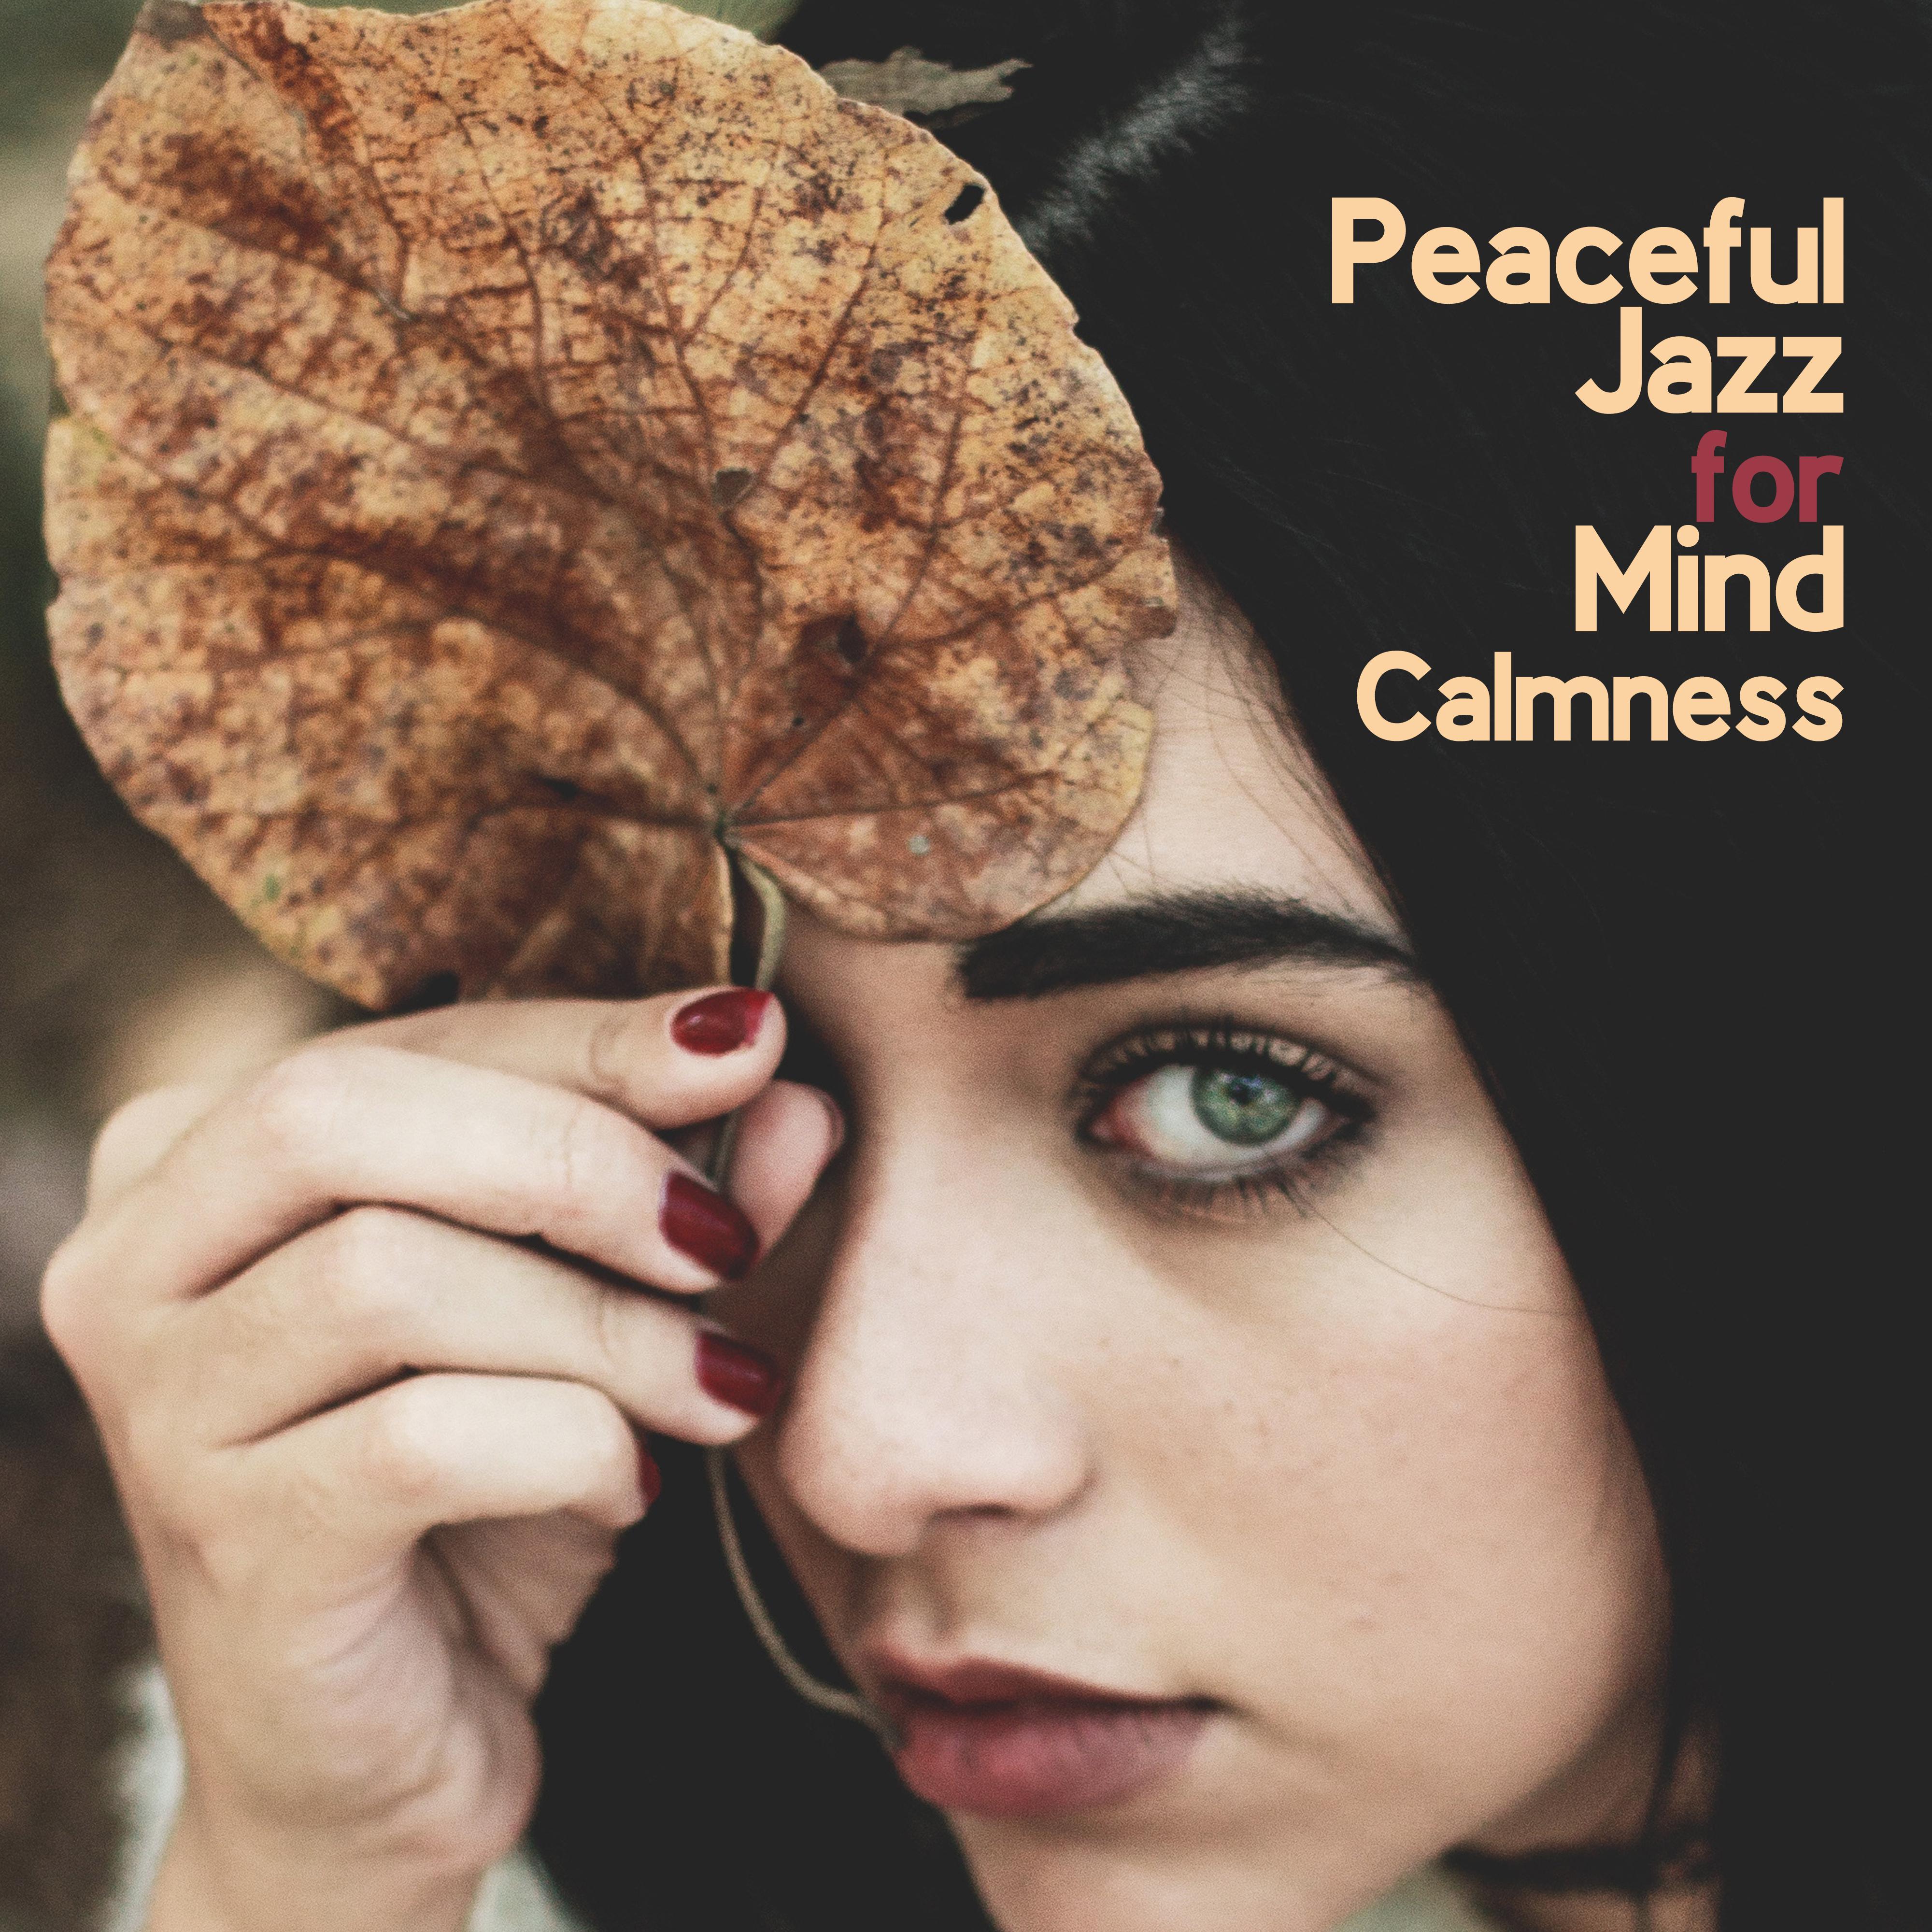 Peaceful Jazz for Mind Calmness